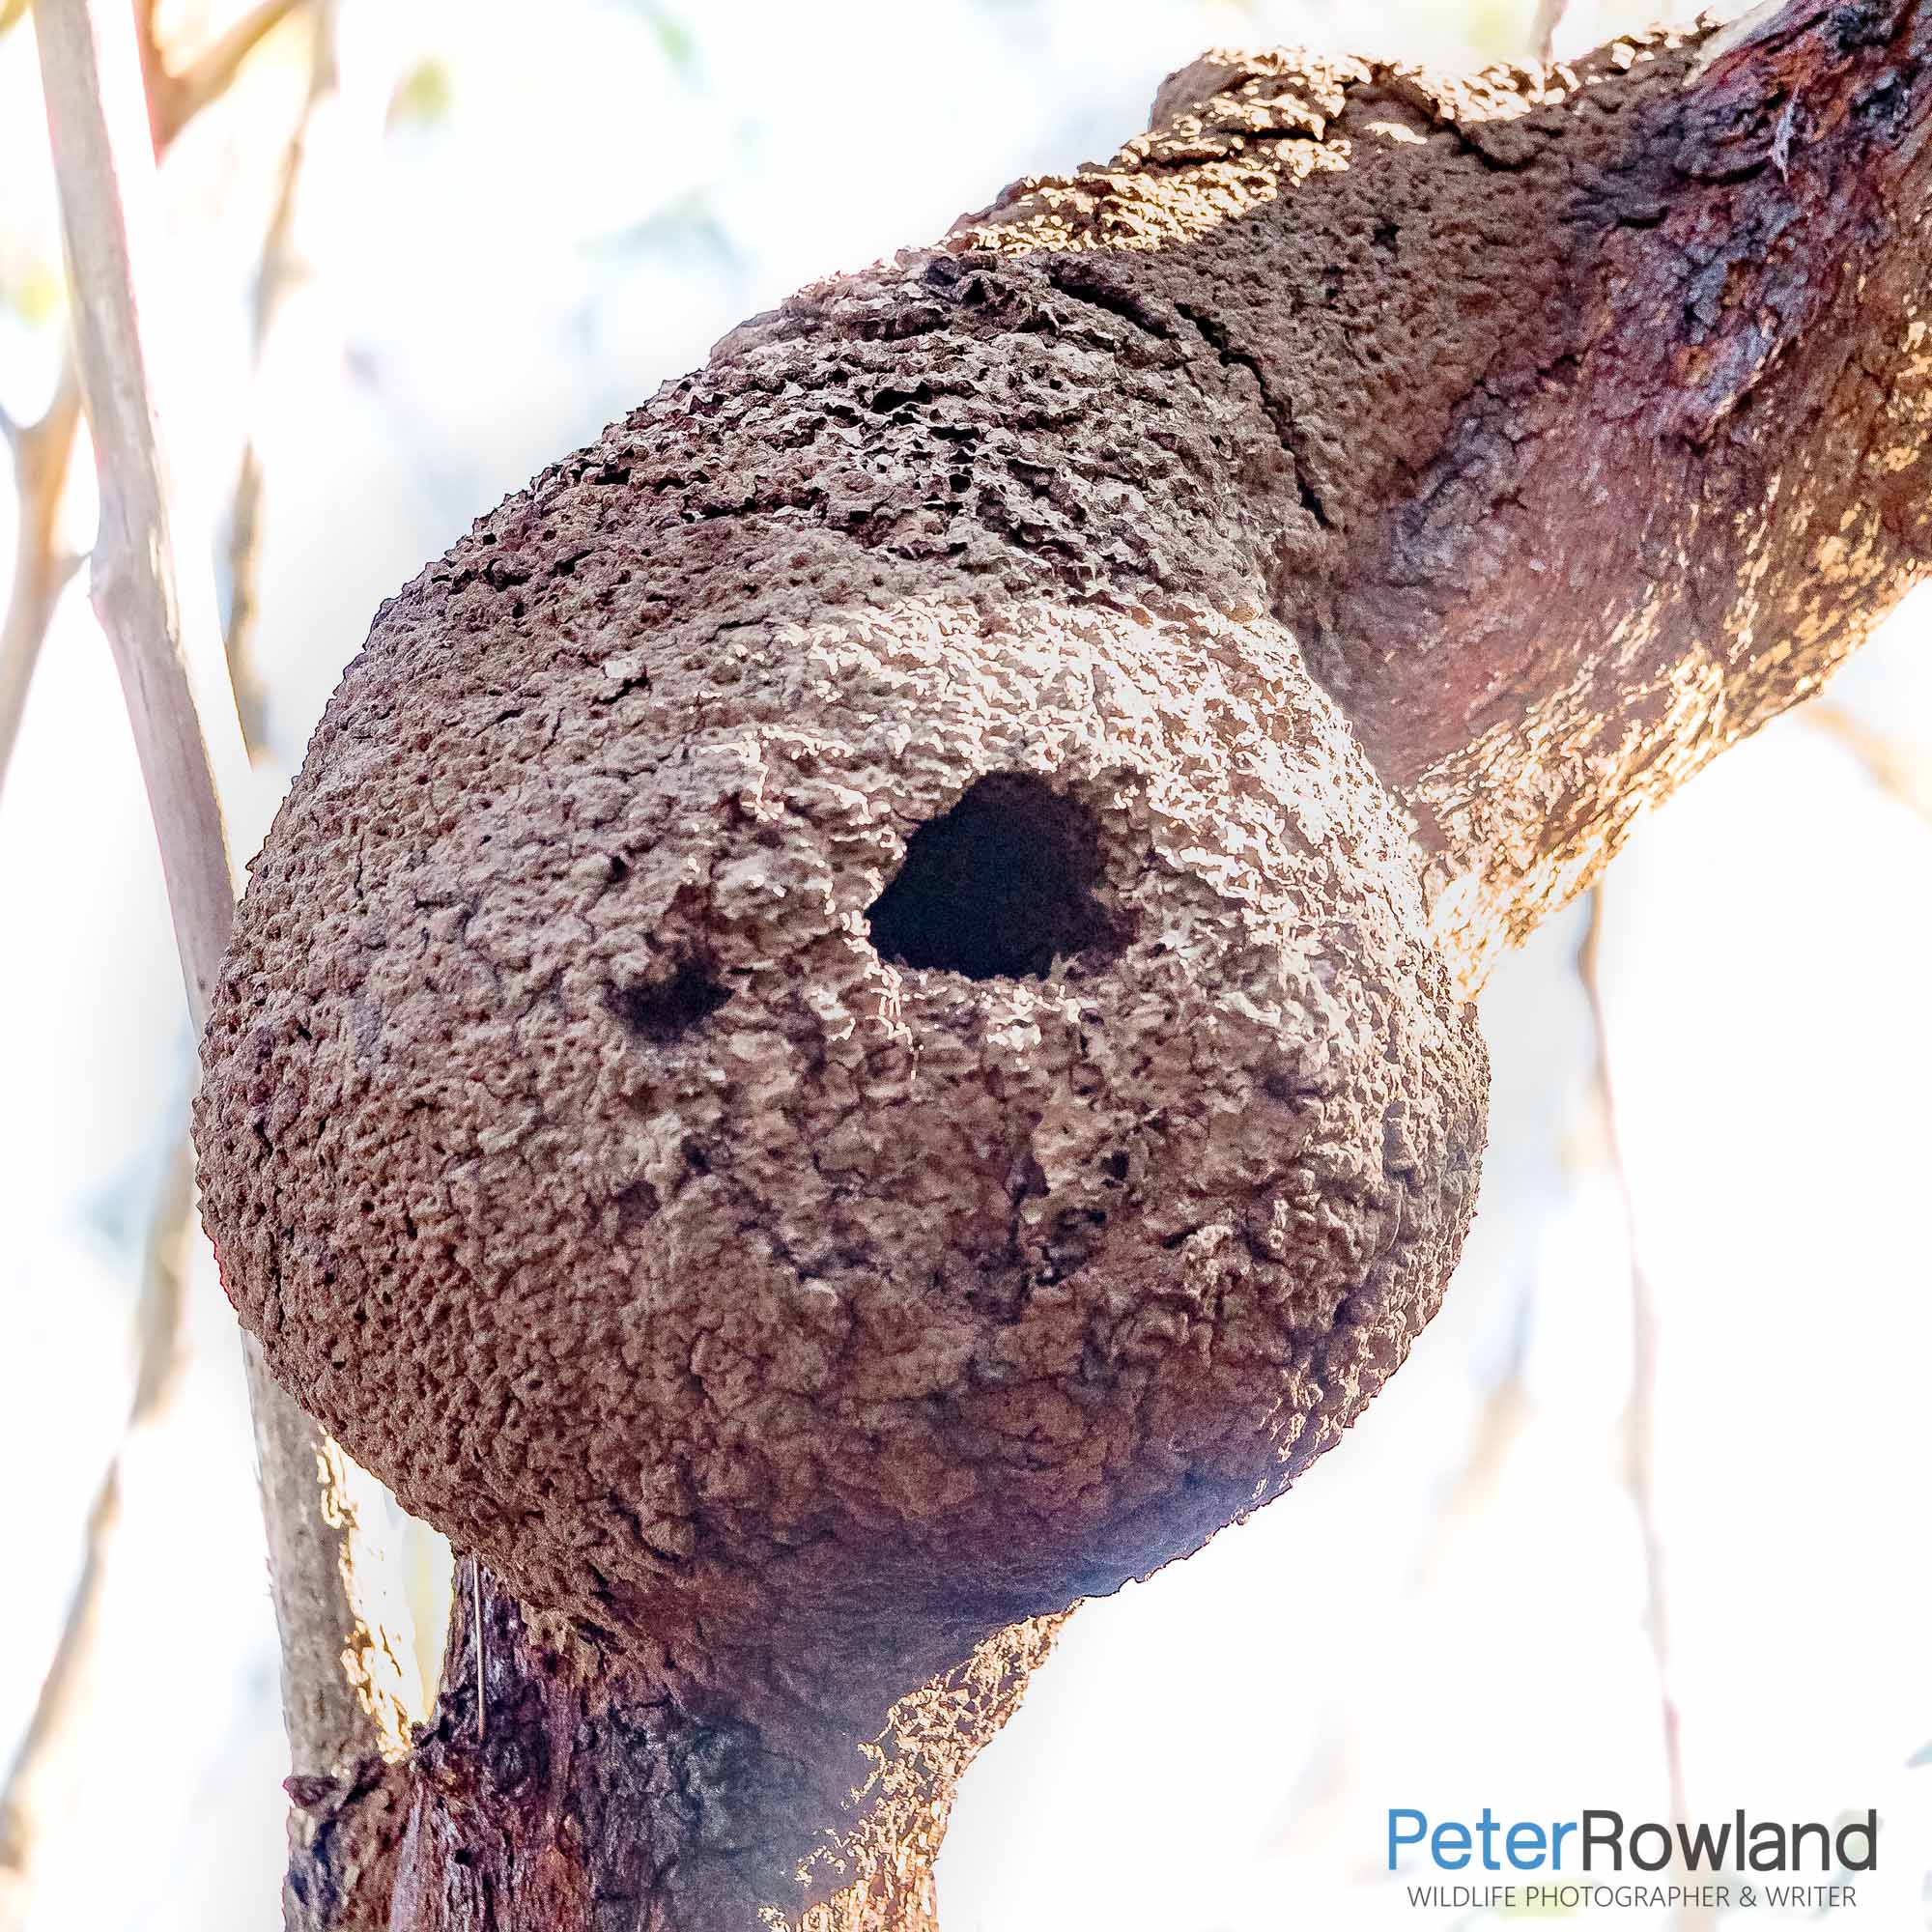 An Arboreal Termite mound with a bird nest hole in it